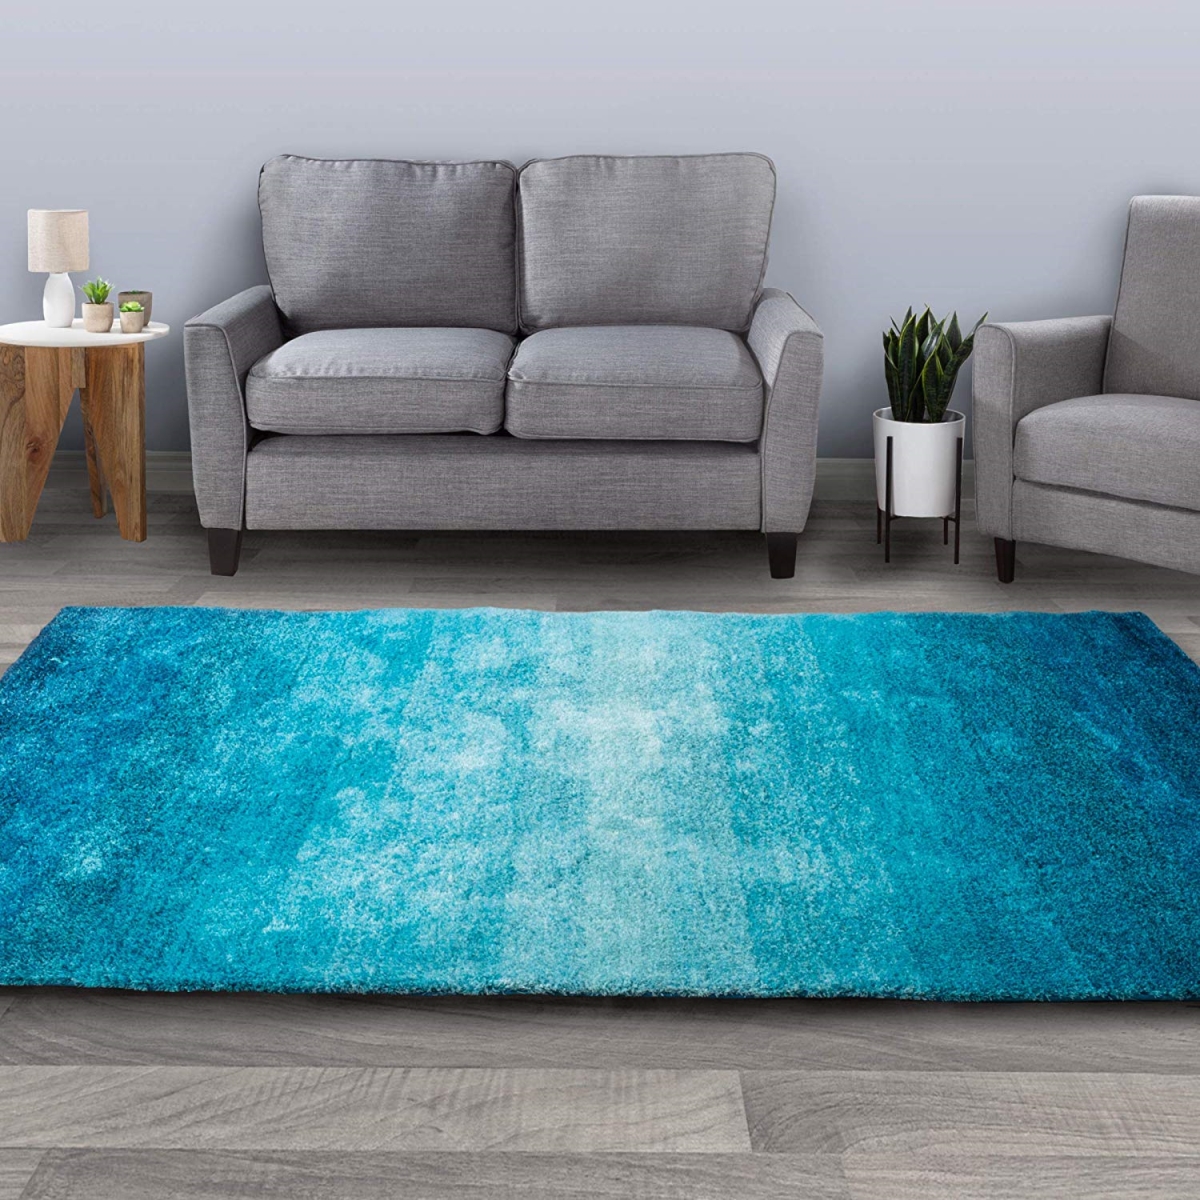 62a-64364 5 Ft. 3 In. X 7 Ft. 7 In. Shag Area Rug Plush Ombre Throw Carpet, Turqouise